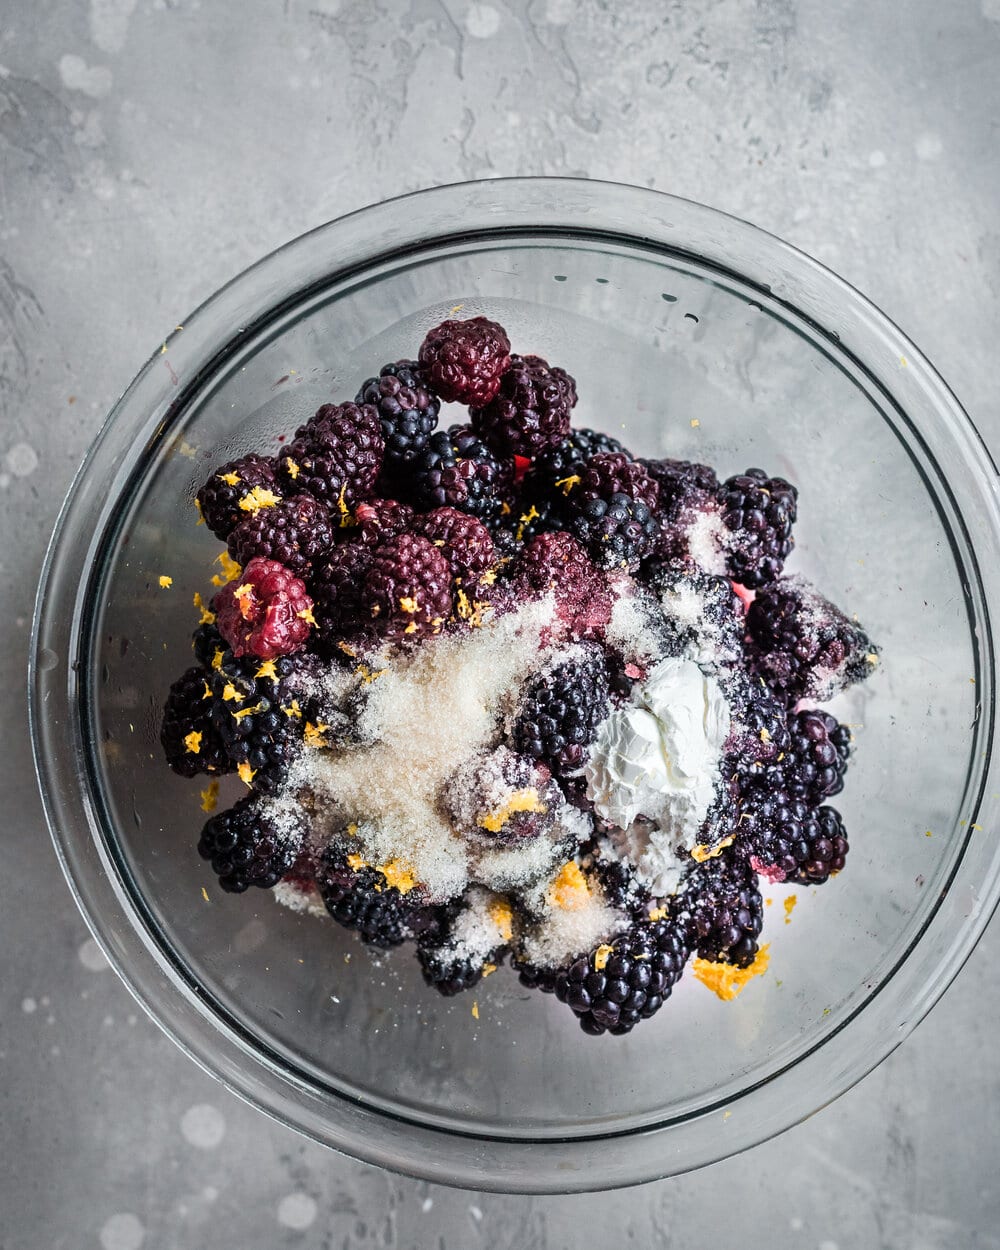 Blackberries, sugar and zest in a glass bowl.